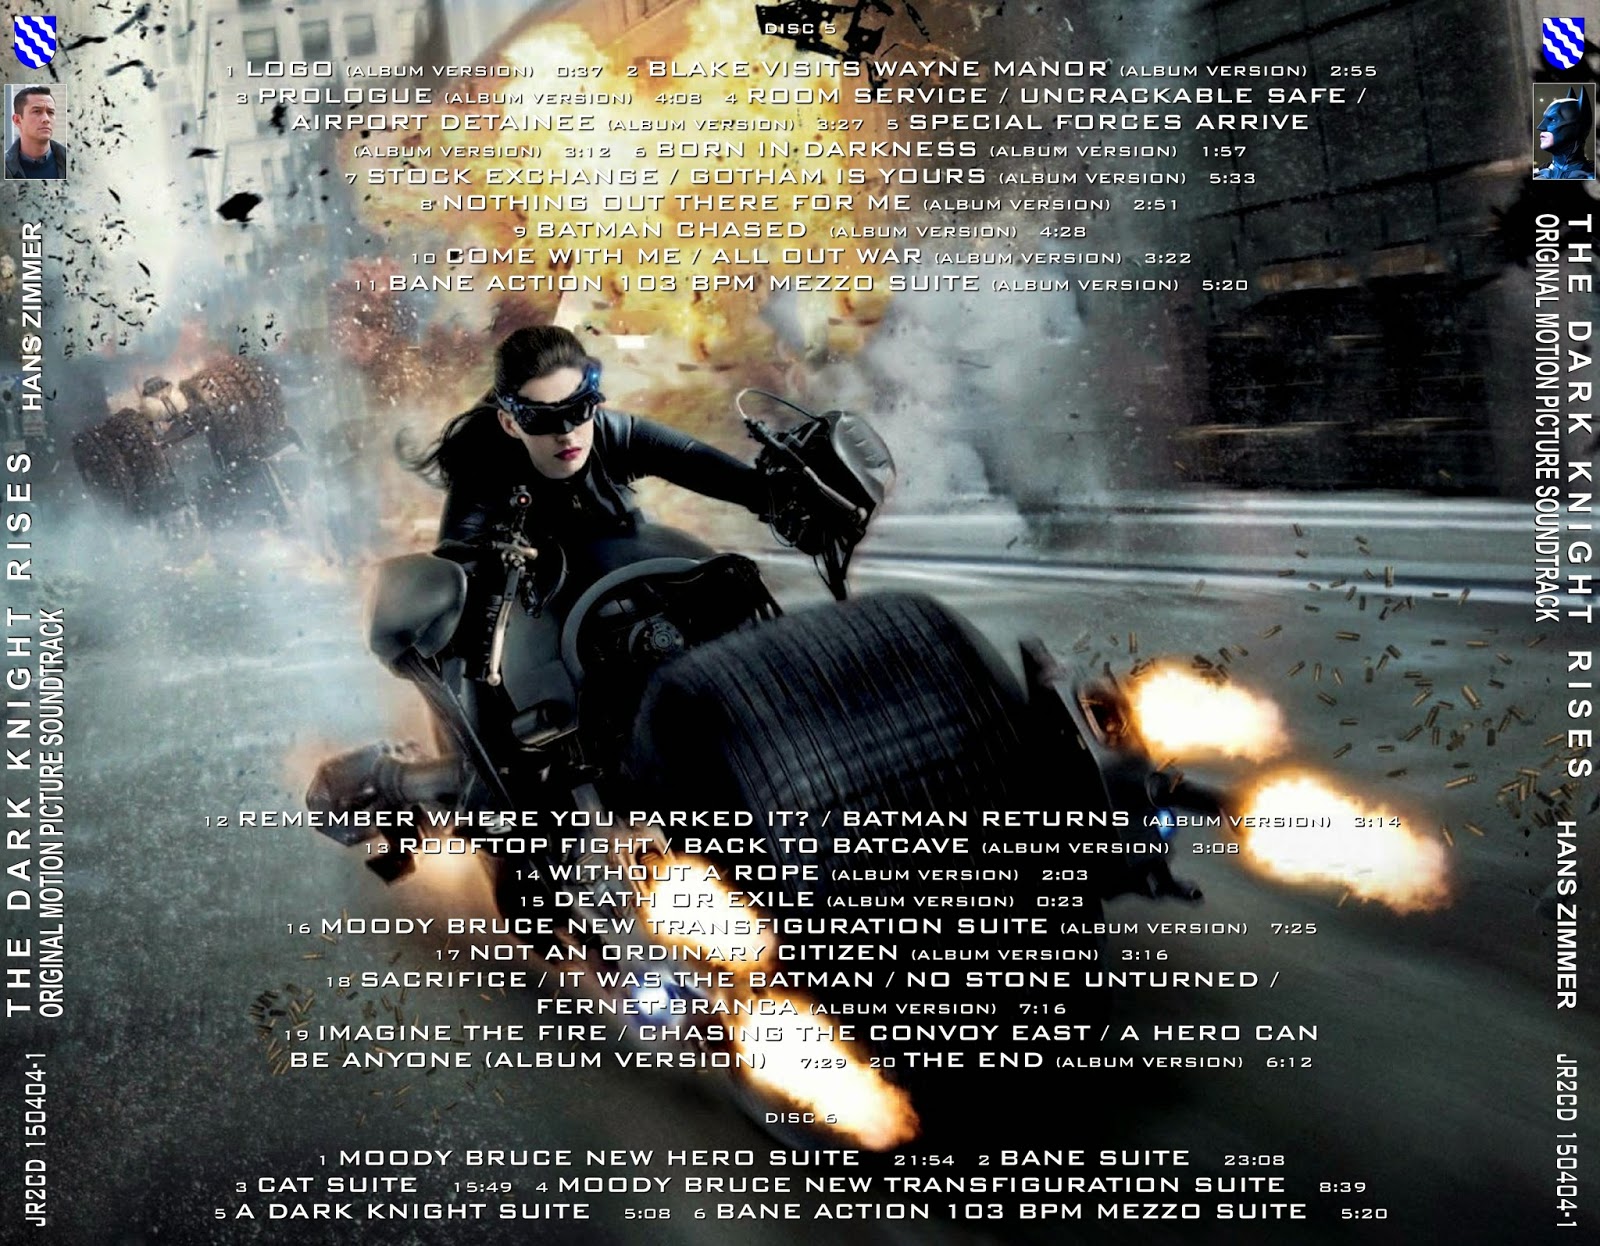 LE BLOG DE CHIEF DUNDEE: THE DARK KNIGHT RISES Complete Score - Hans Zimmer